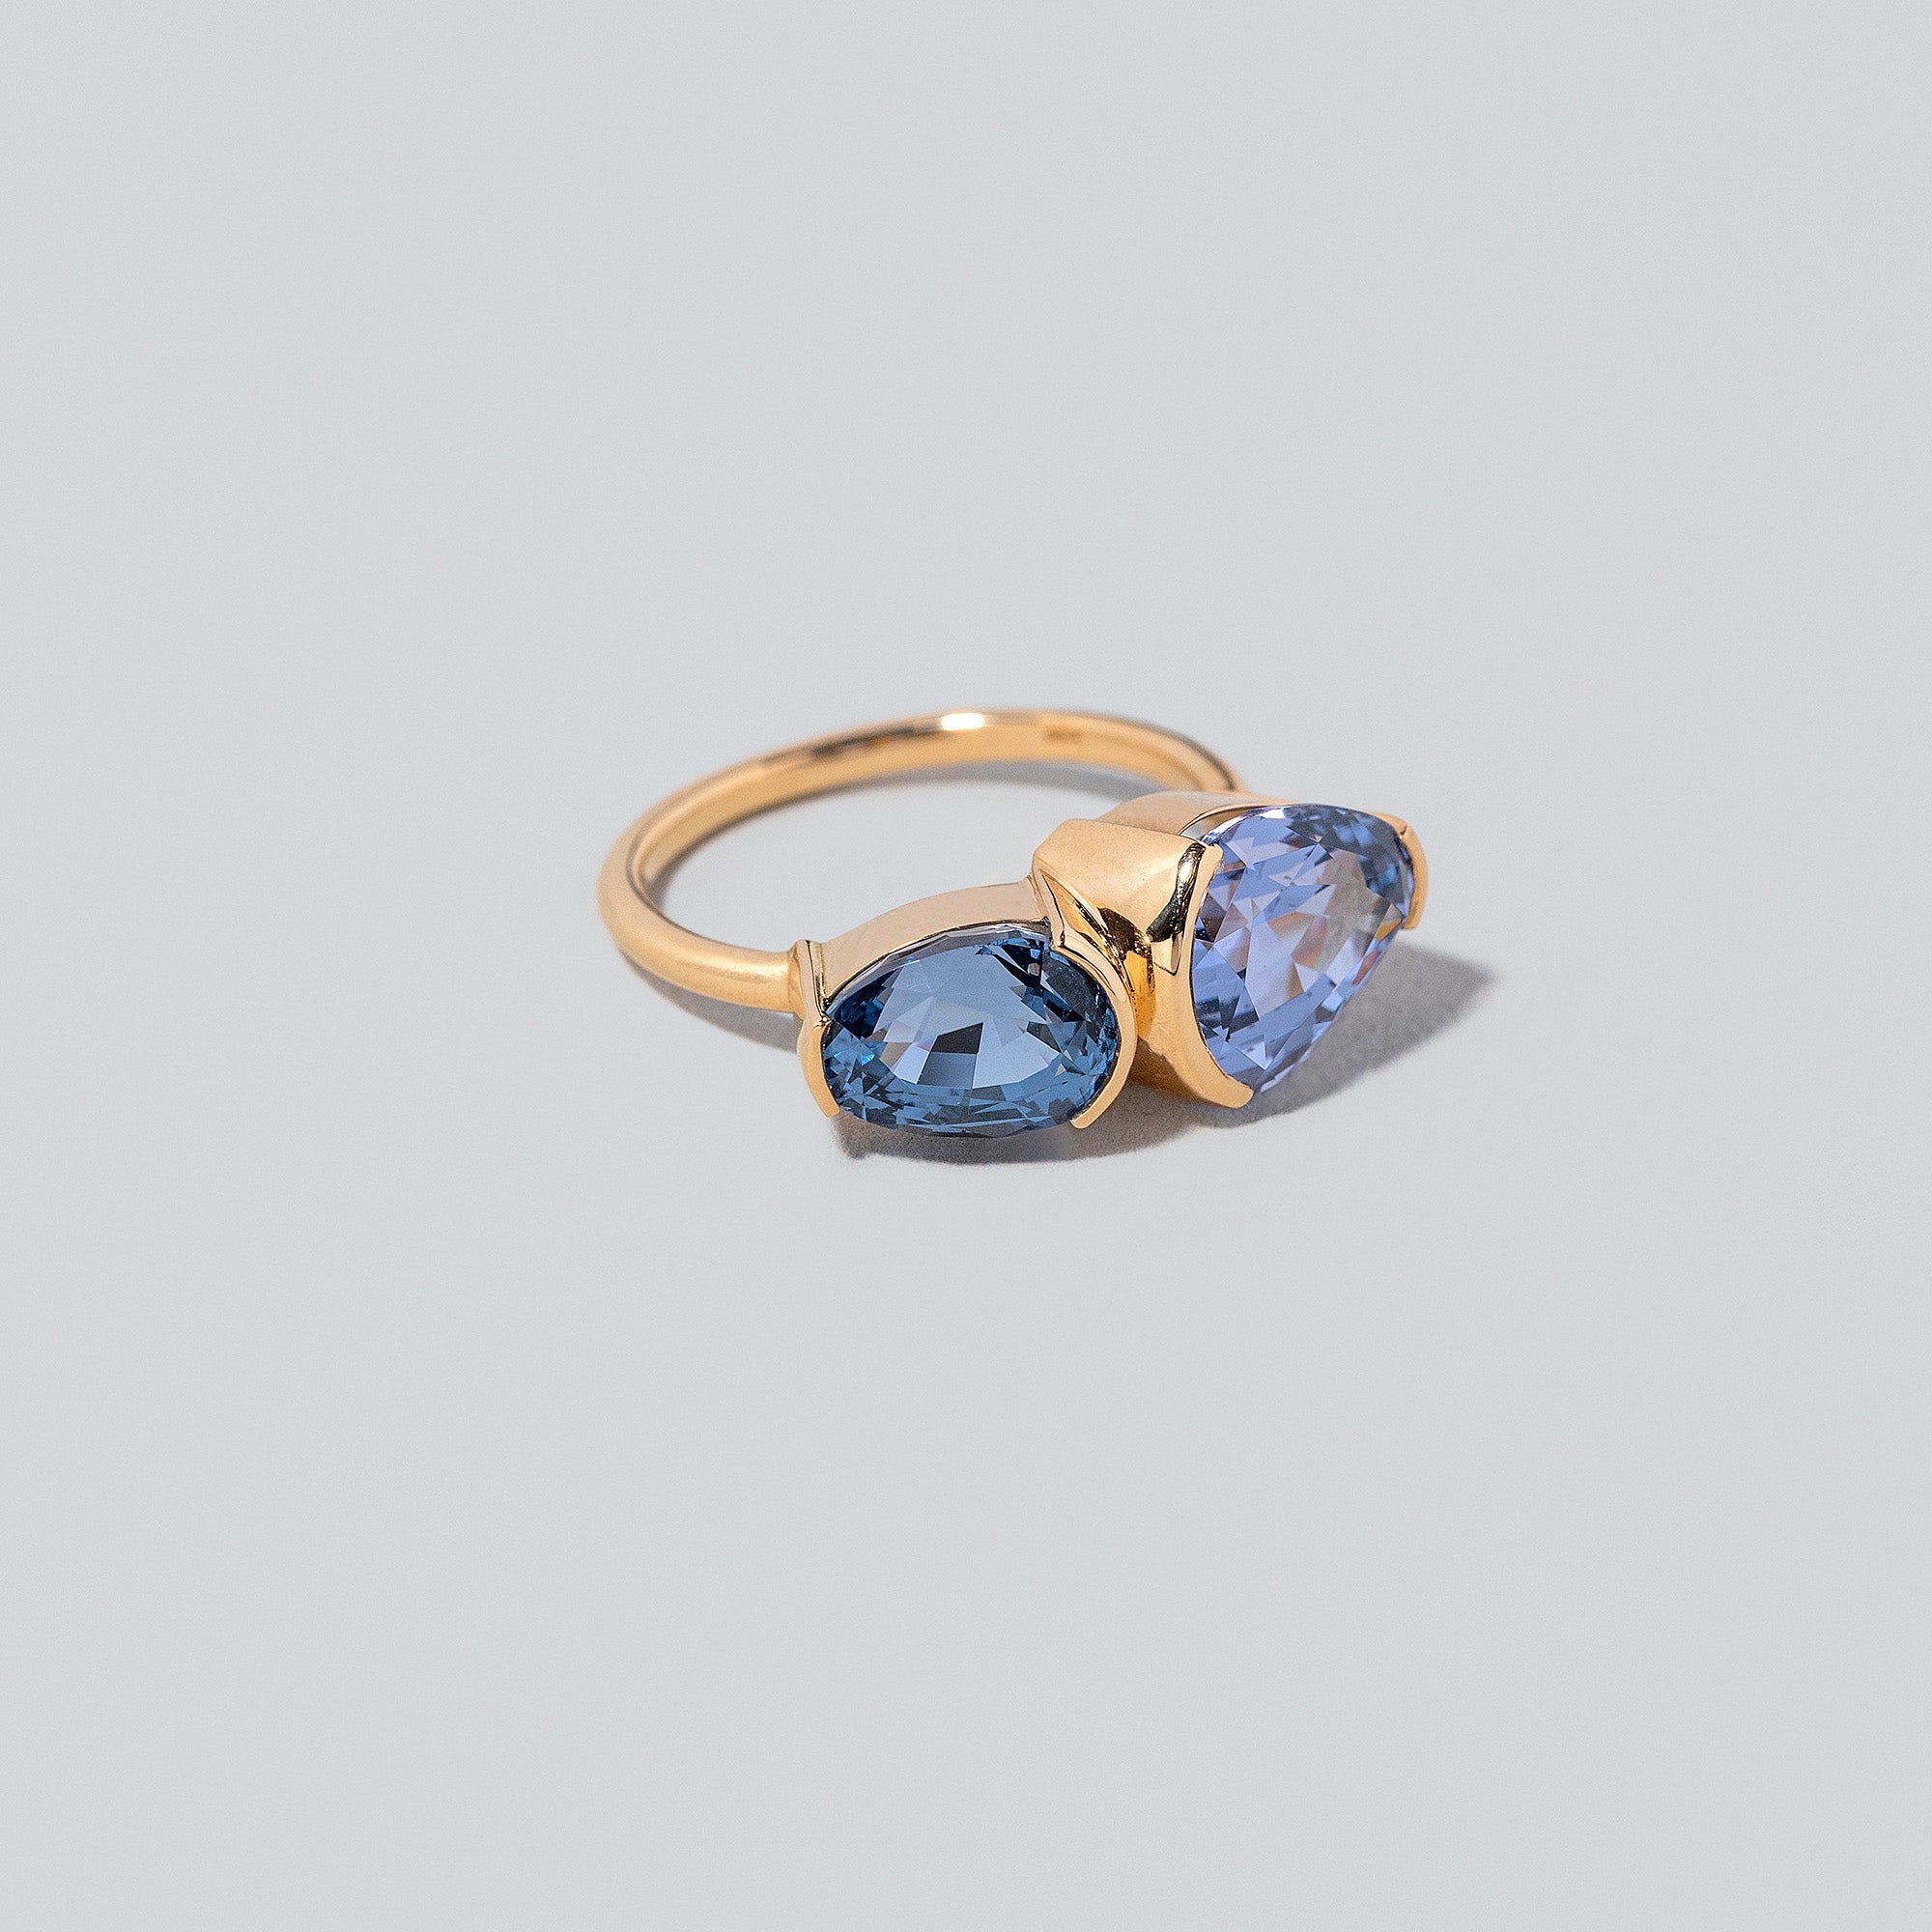 product_details:: Matsu Ring on light color background.